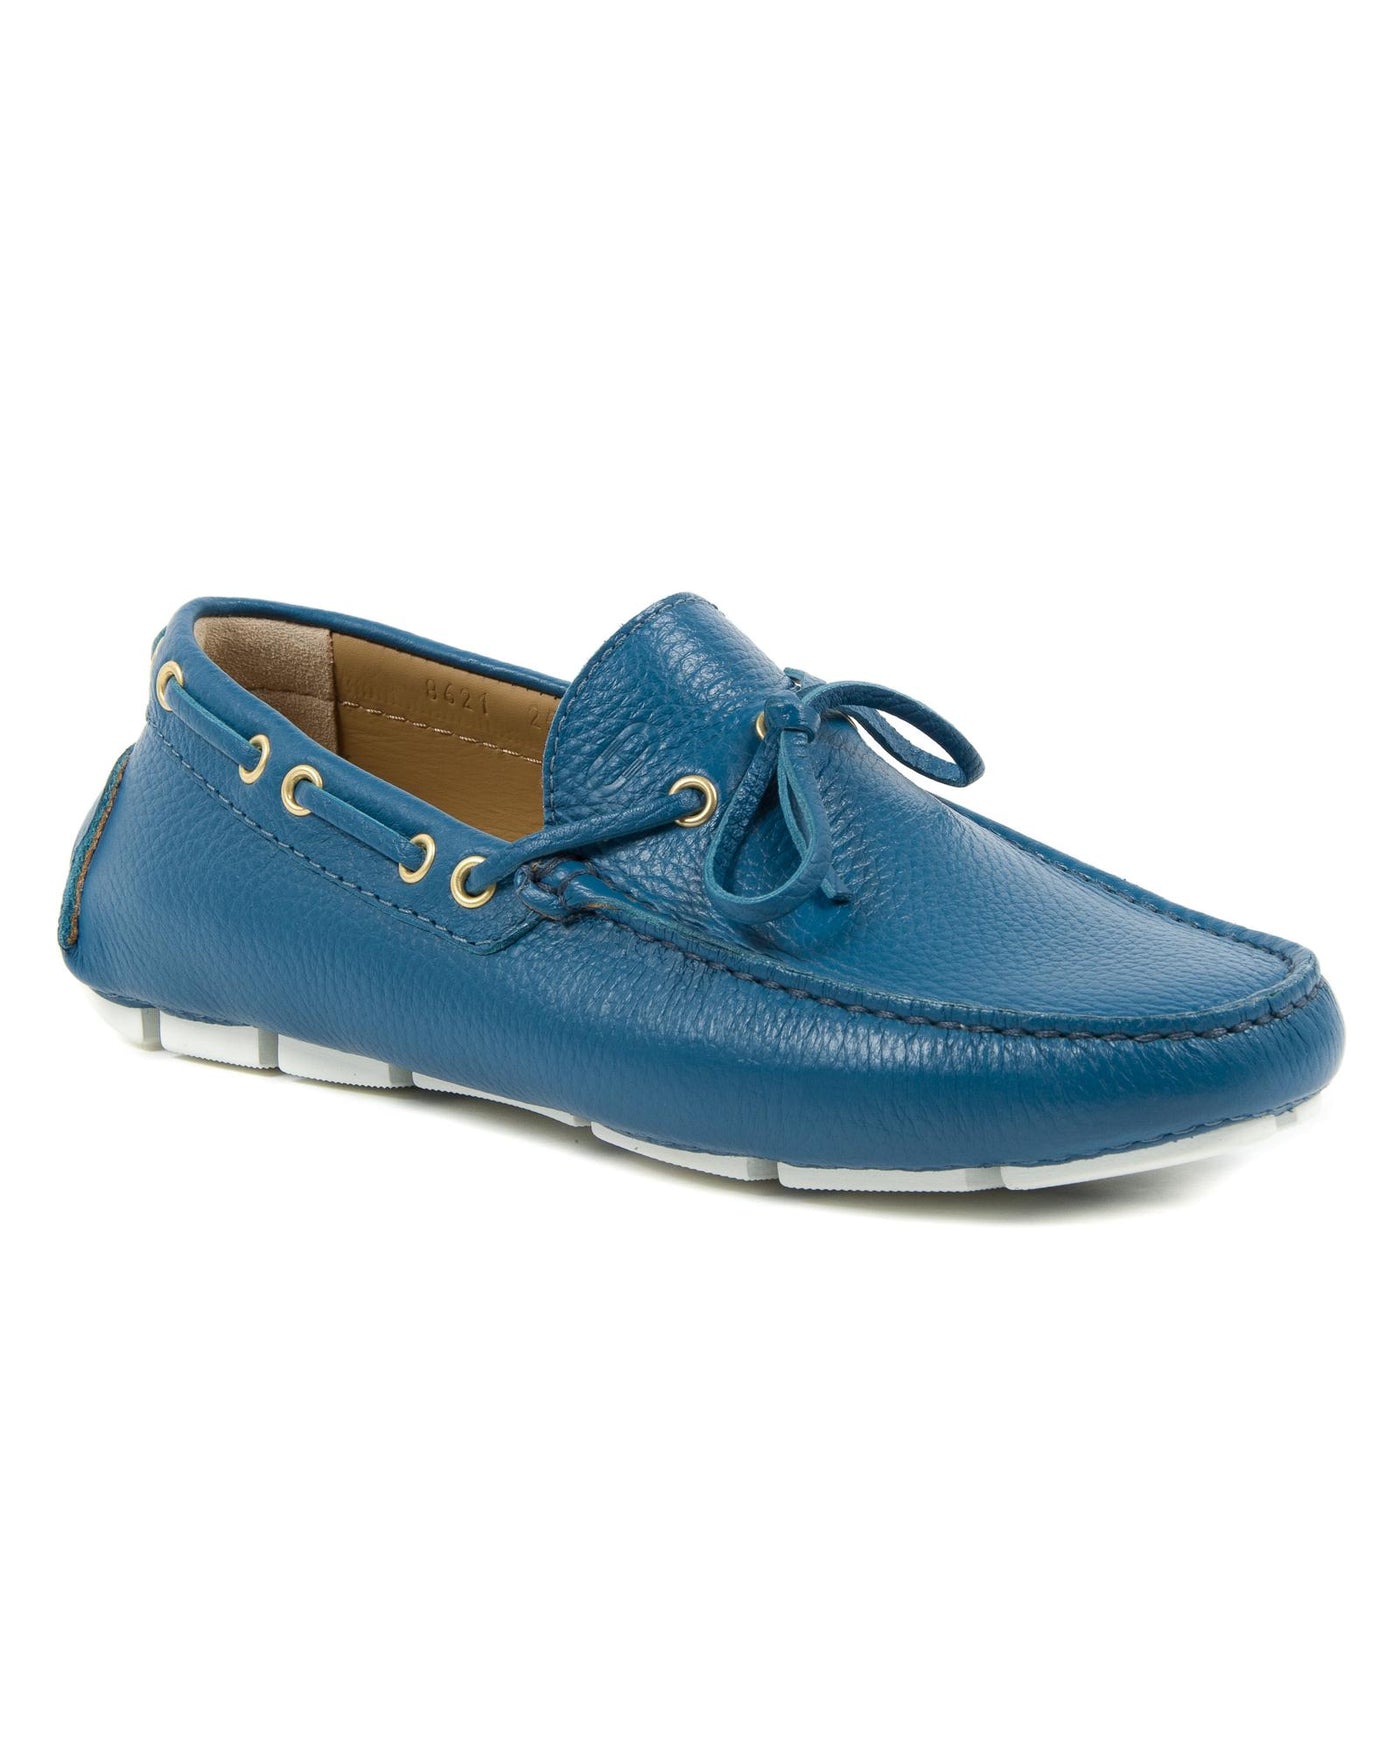 Hand-Stitched Leather Loafers - 43 EU